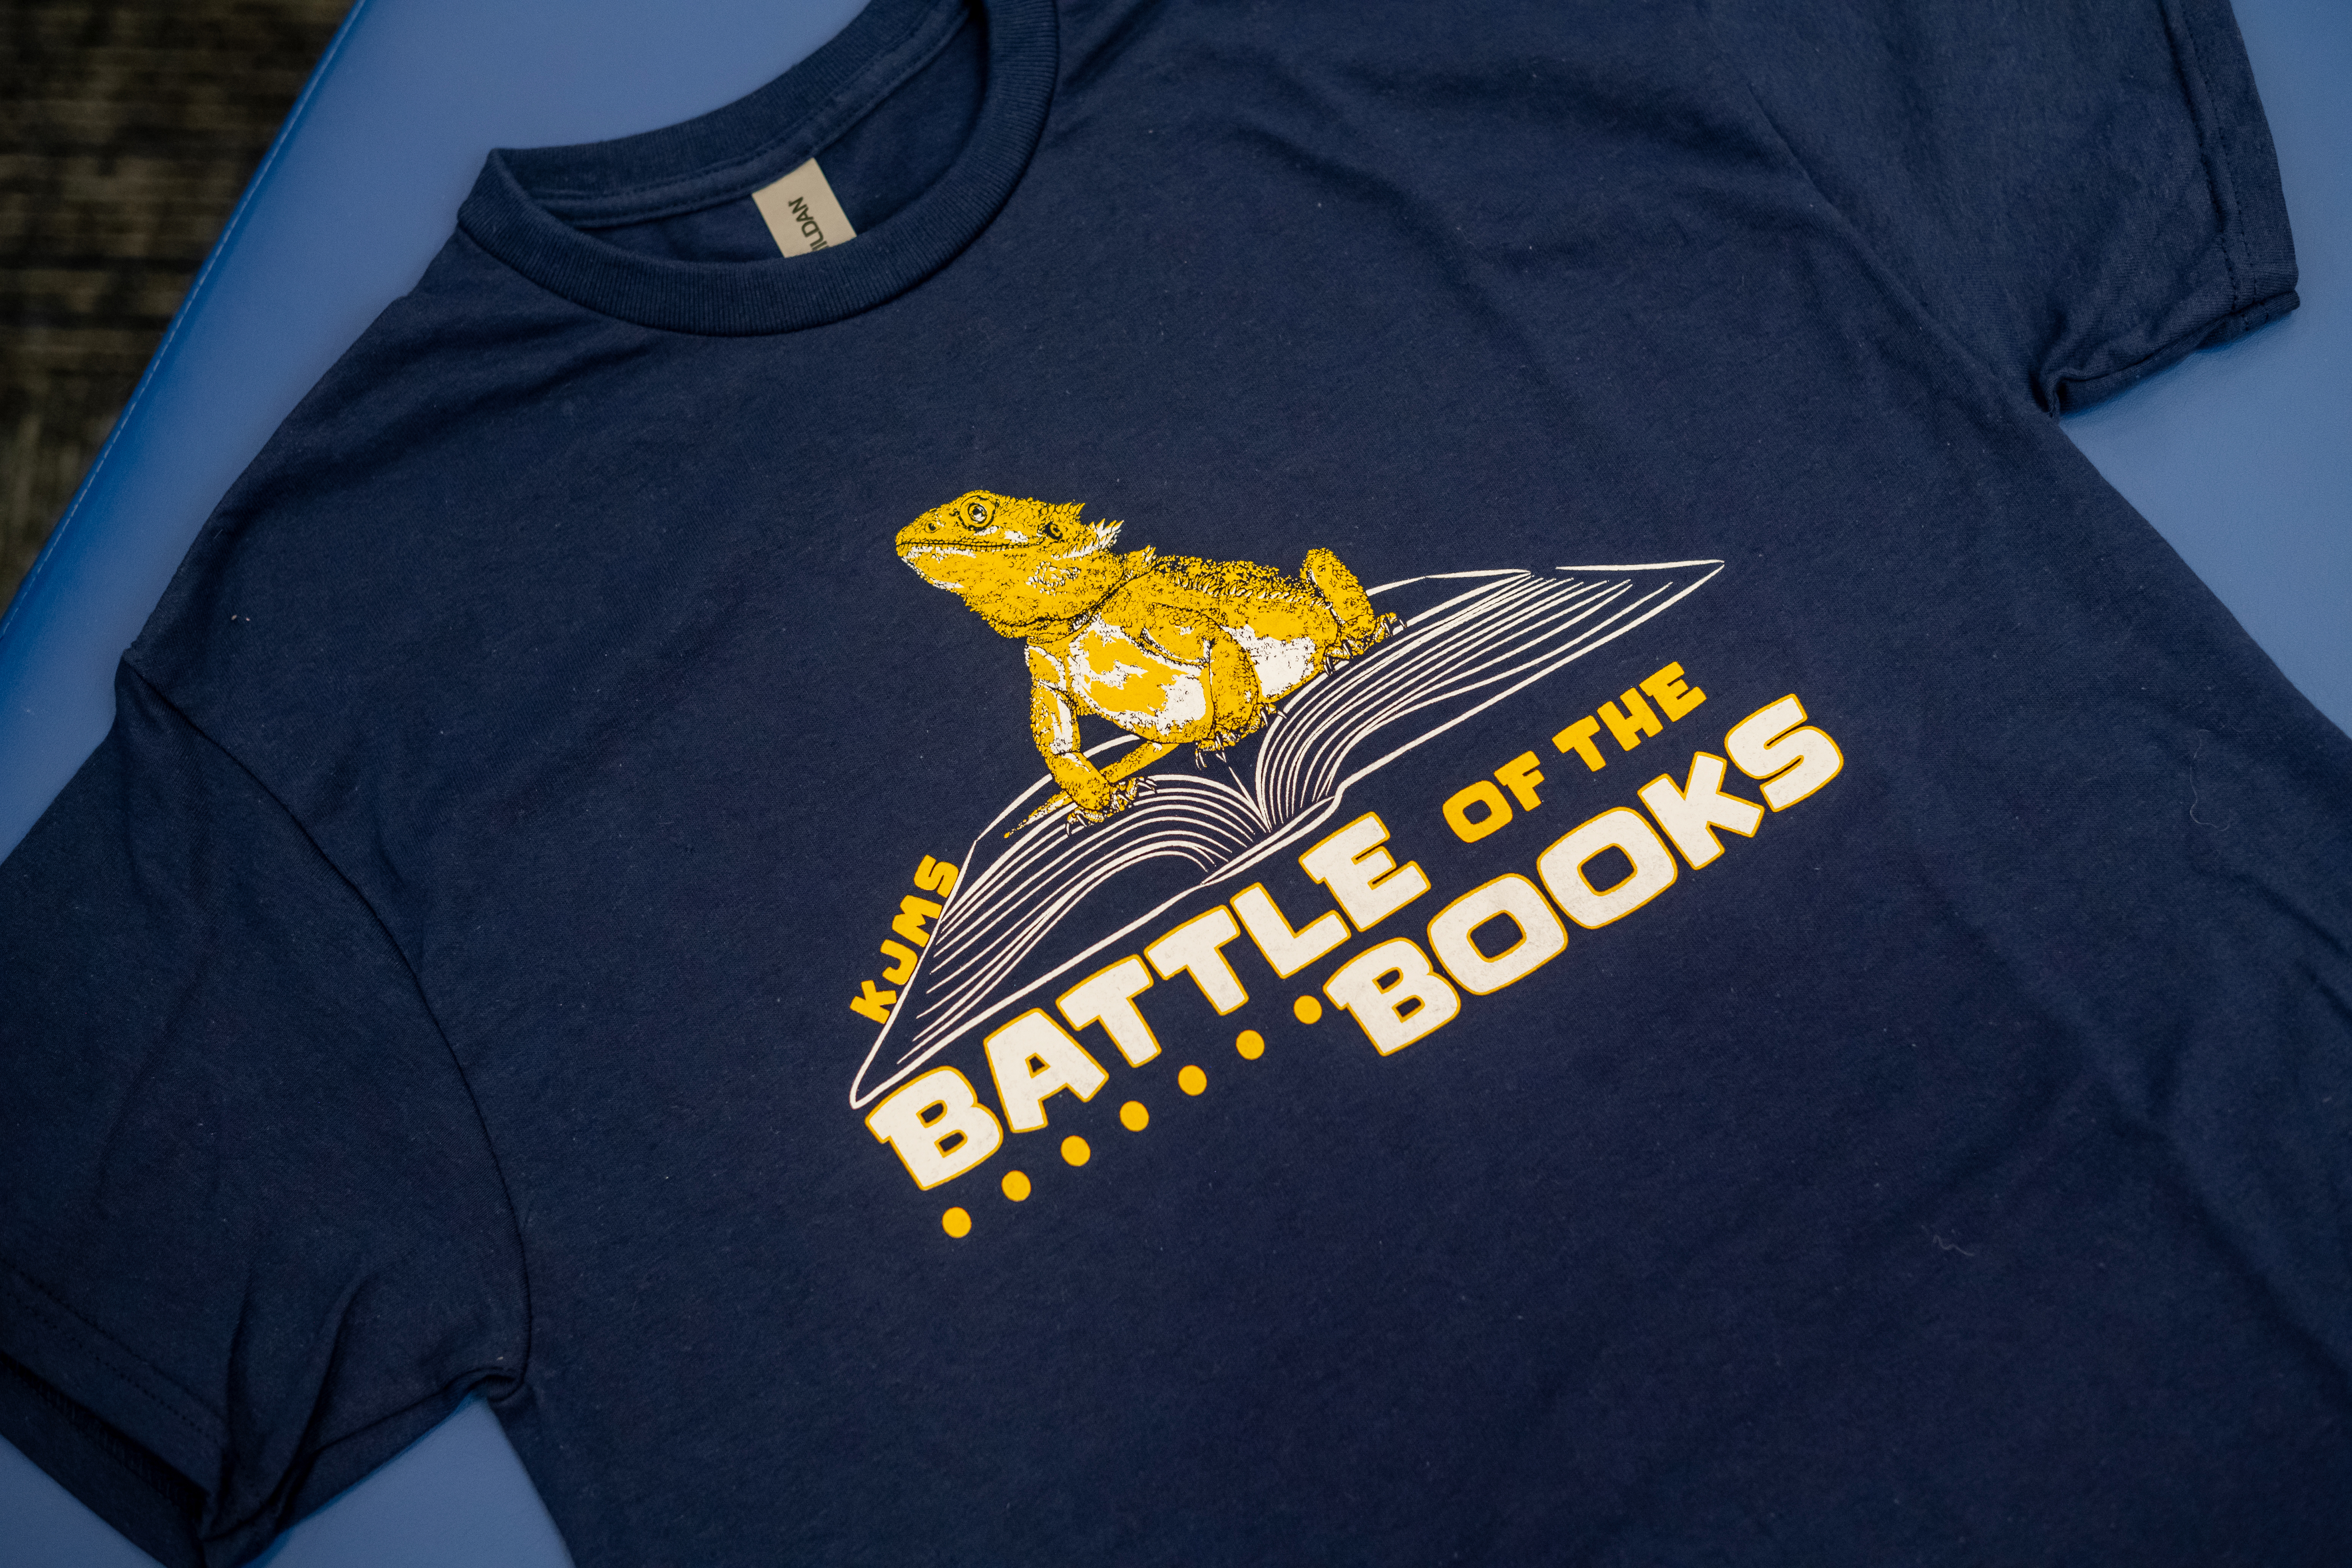 KJMS Battle of the books t shirt featuring a bearded dragon